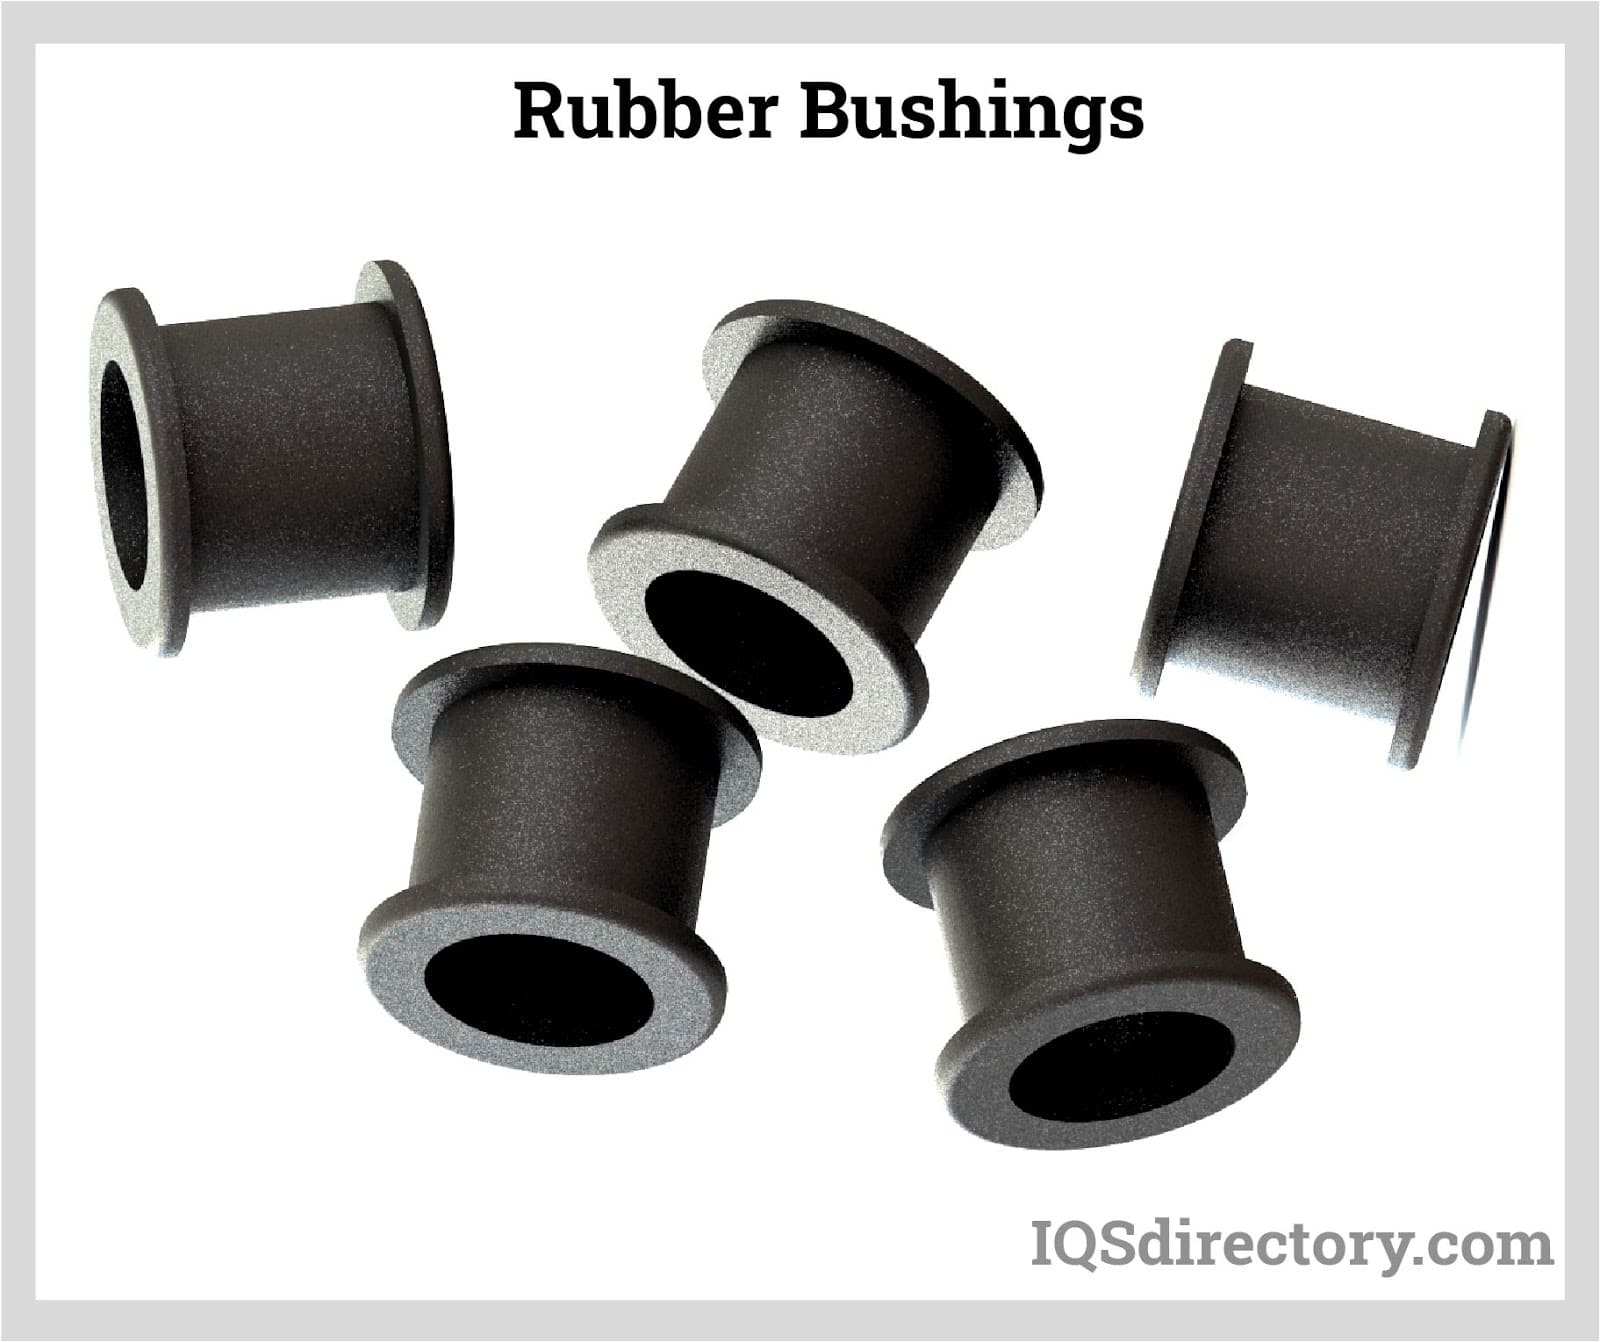 Rubber Bushings: Types, Uses, Manufacturing, and Materials